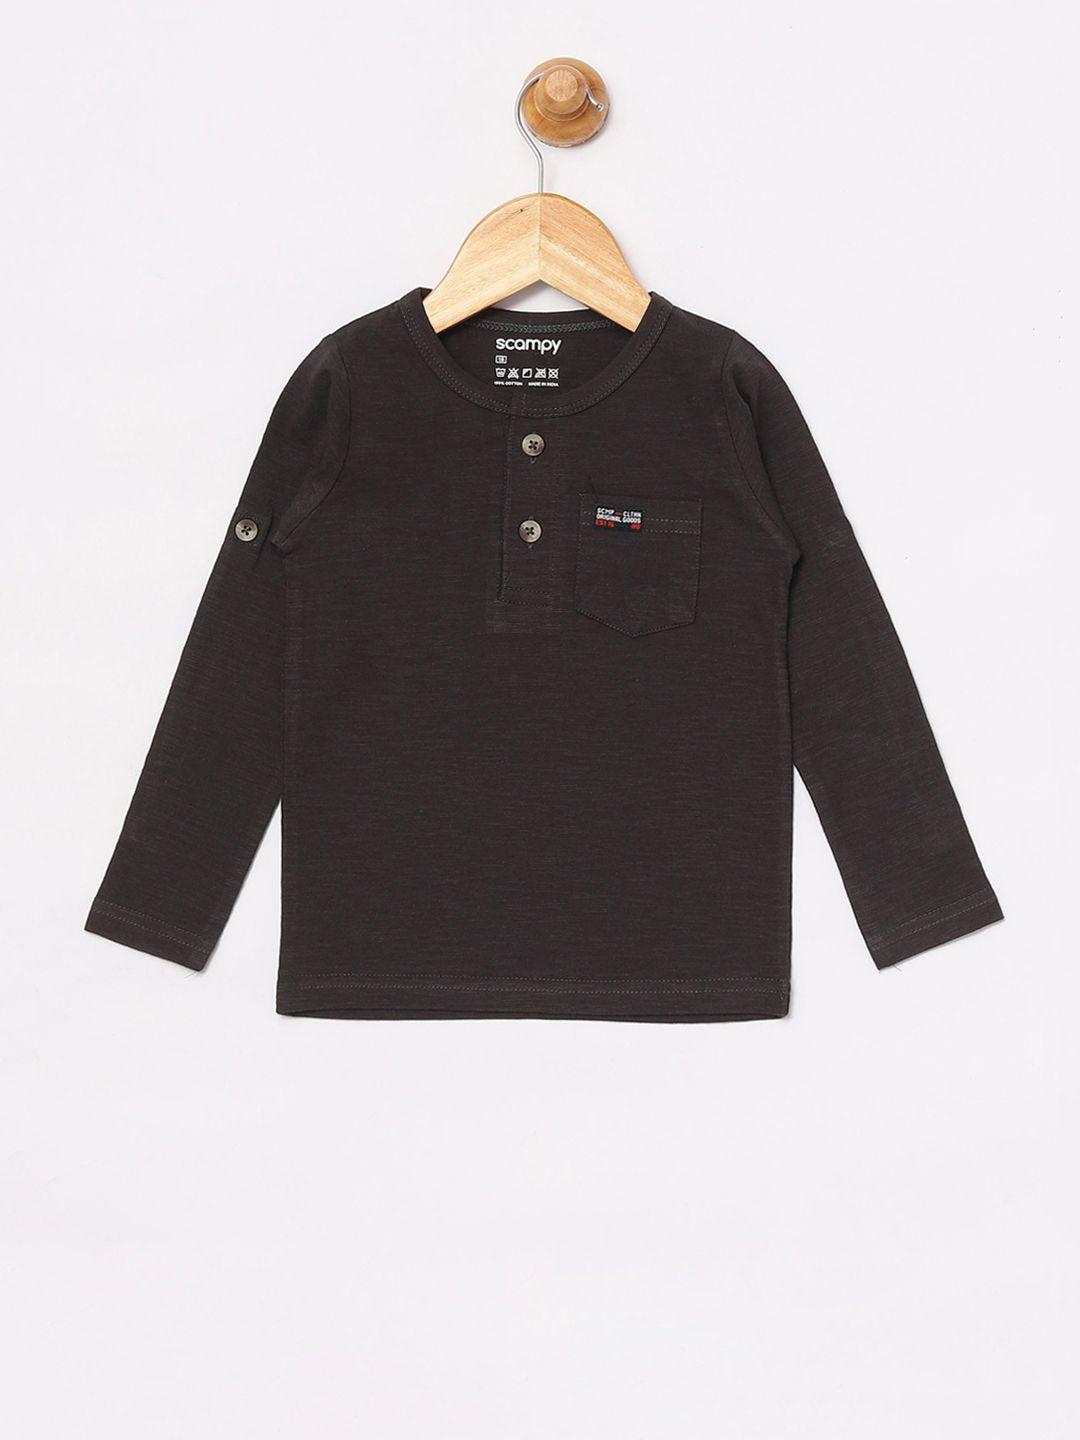 scampy boys black solid henley neck t-shirt